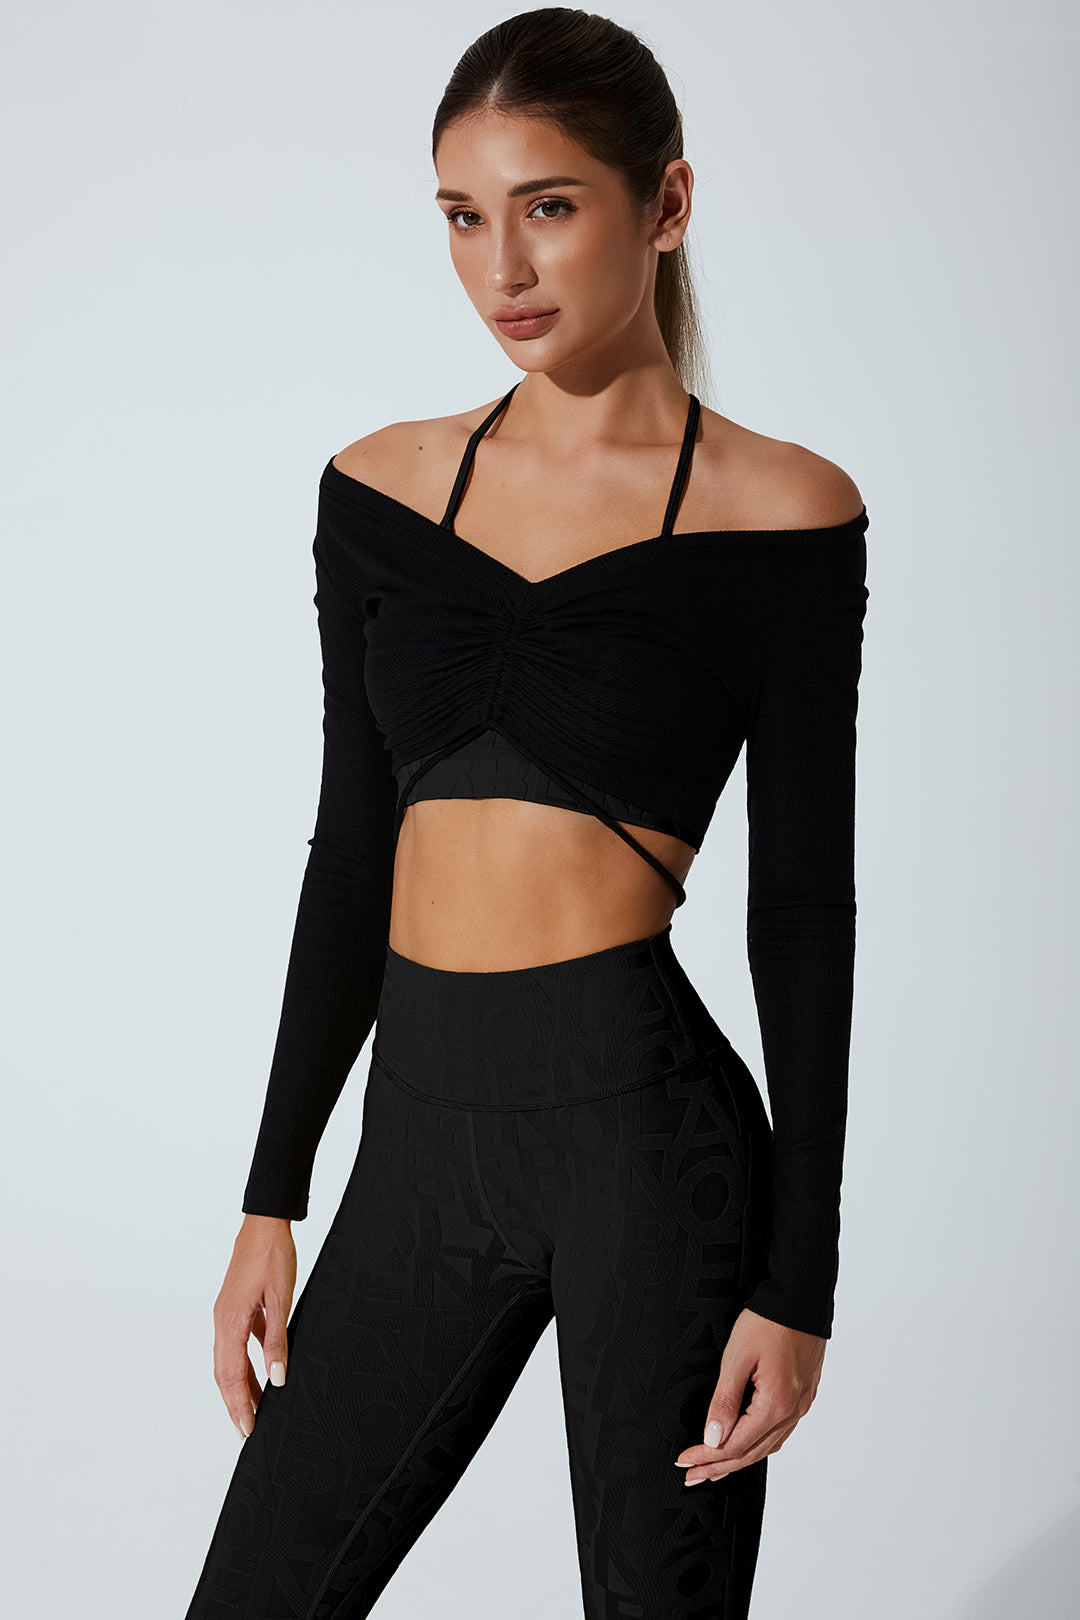 Black drawstring long sleeve women's top with a stylish and comfortable design.